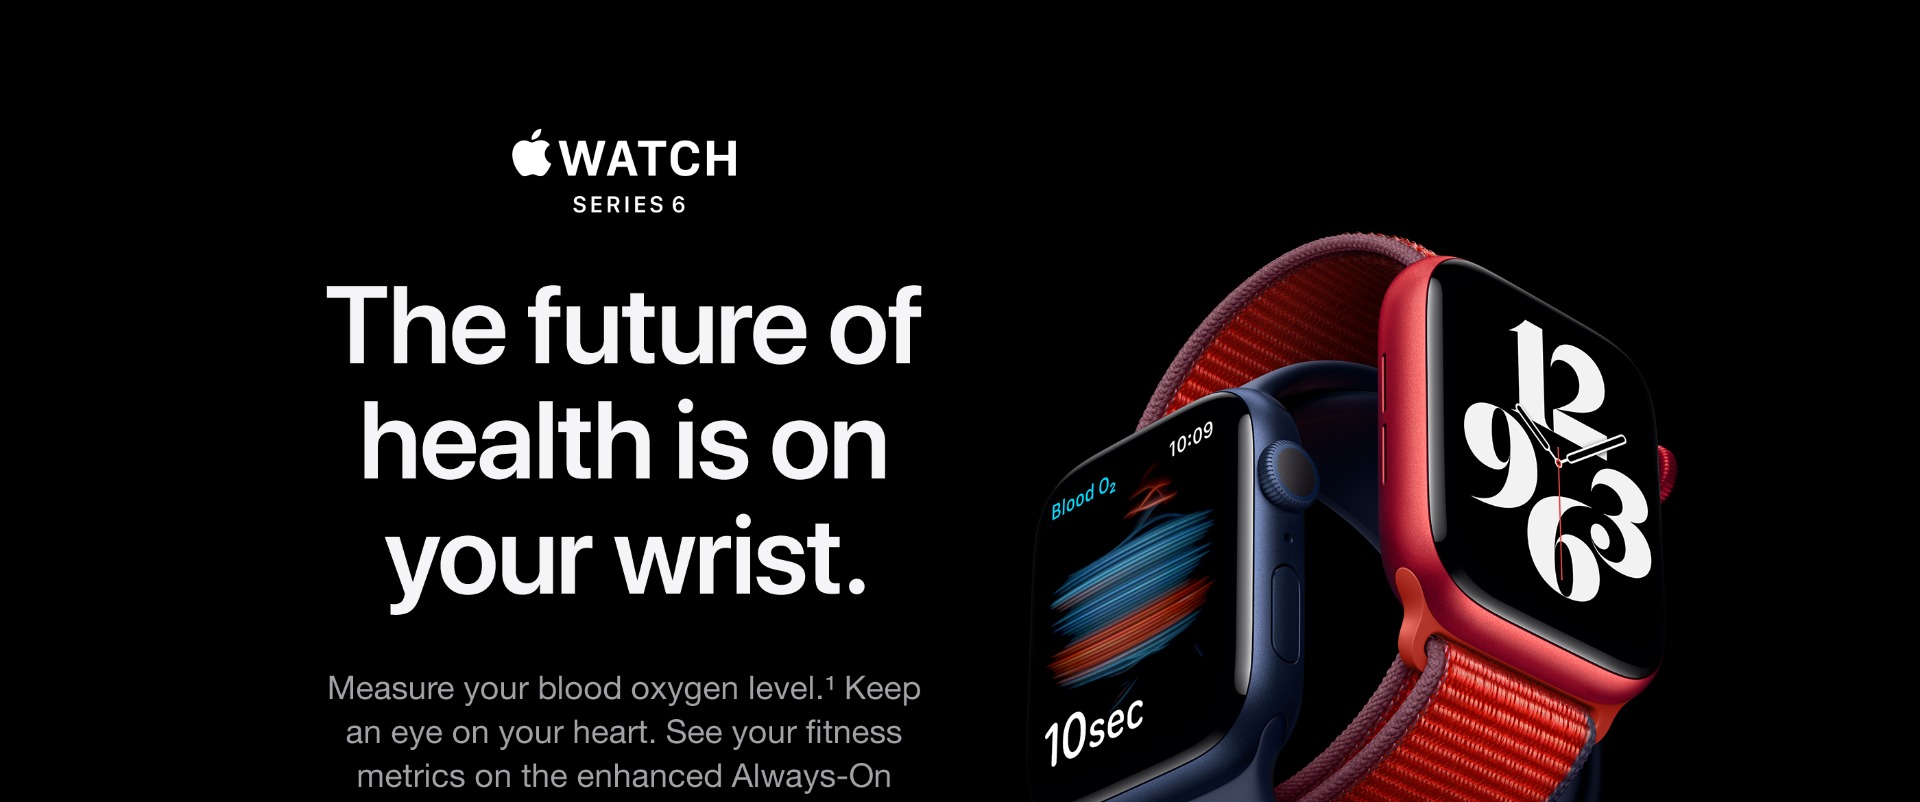 Apple Watch Series 6. The future of health is on your wrist.